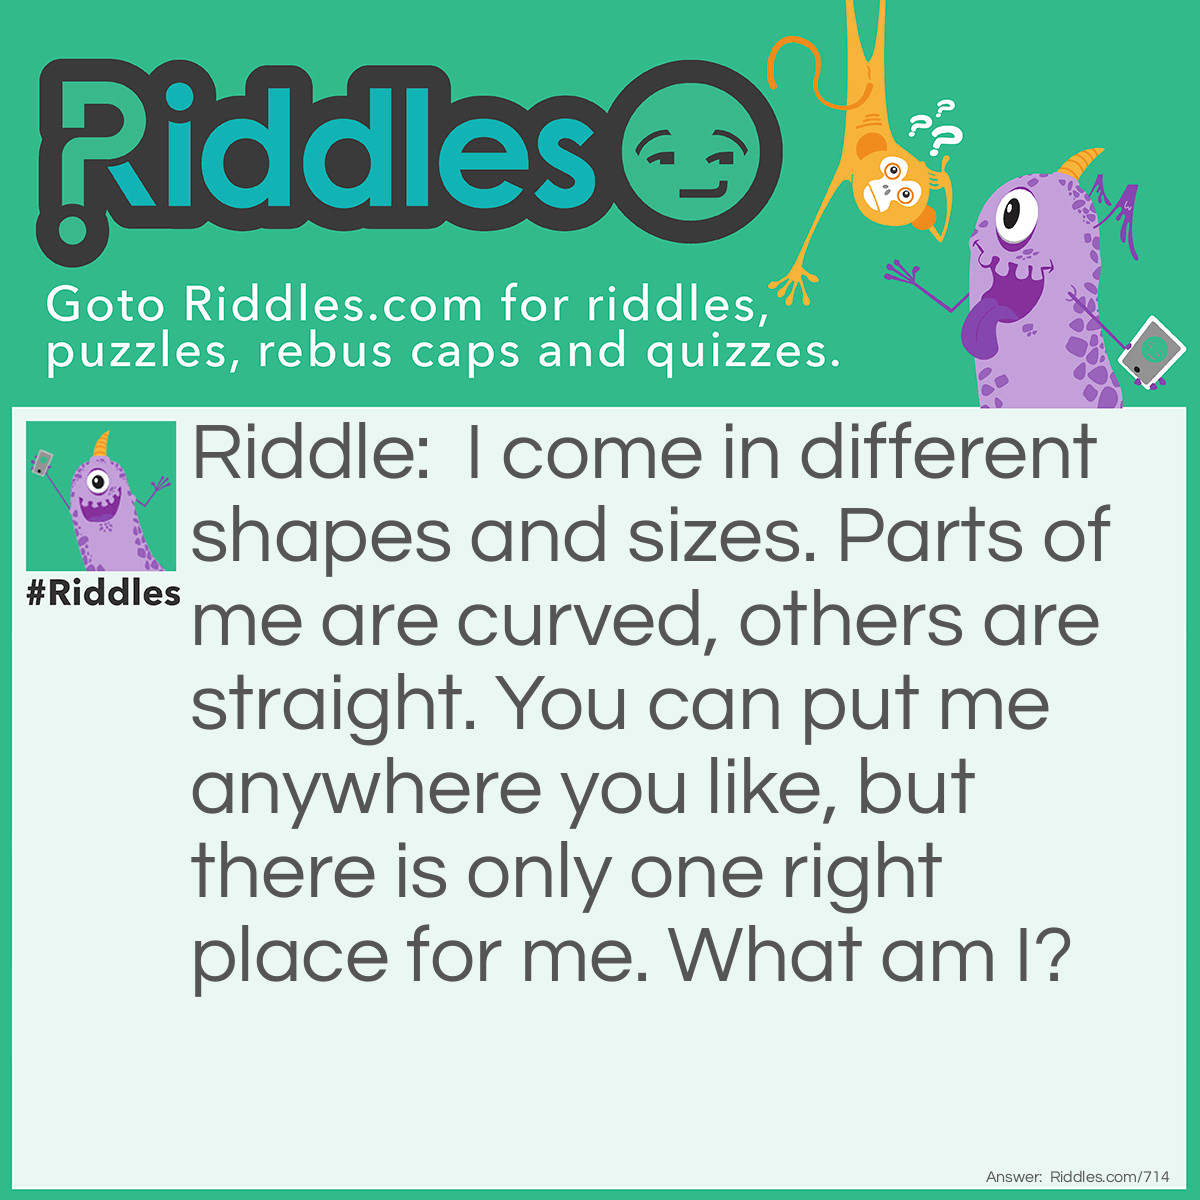 Riddle: I come in different shapes and sizes. Parts of me are curved, others are straight. You can put me anywhere you like, but there is only one right place for me. What am I? Answer: Jigsaw puzzle pieces.